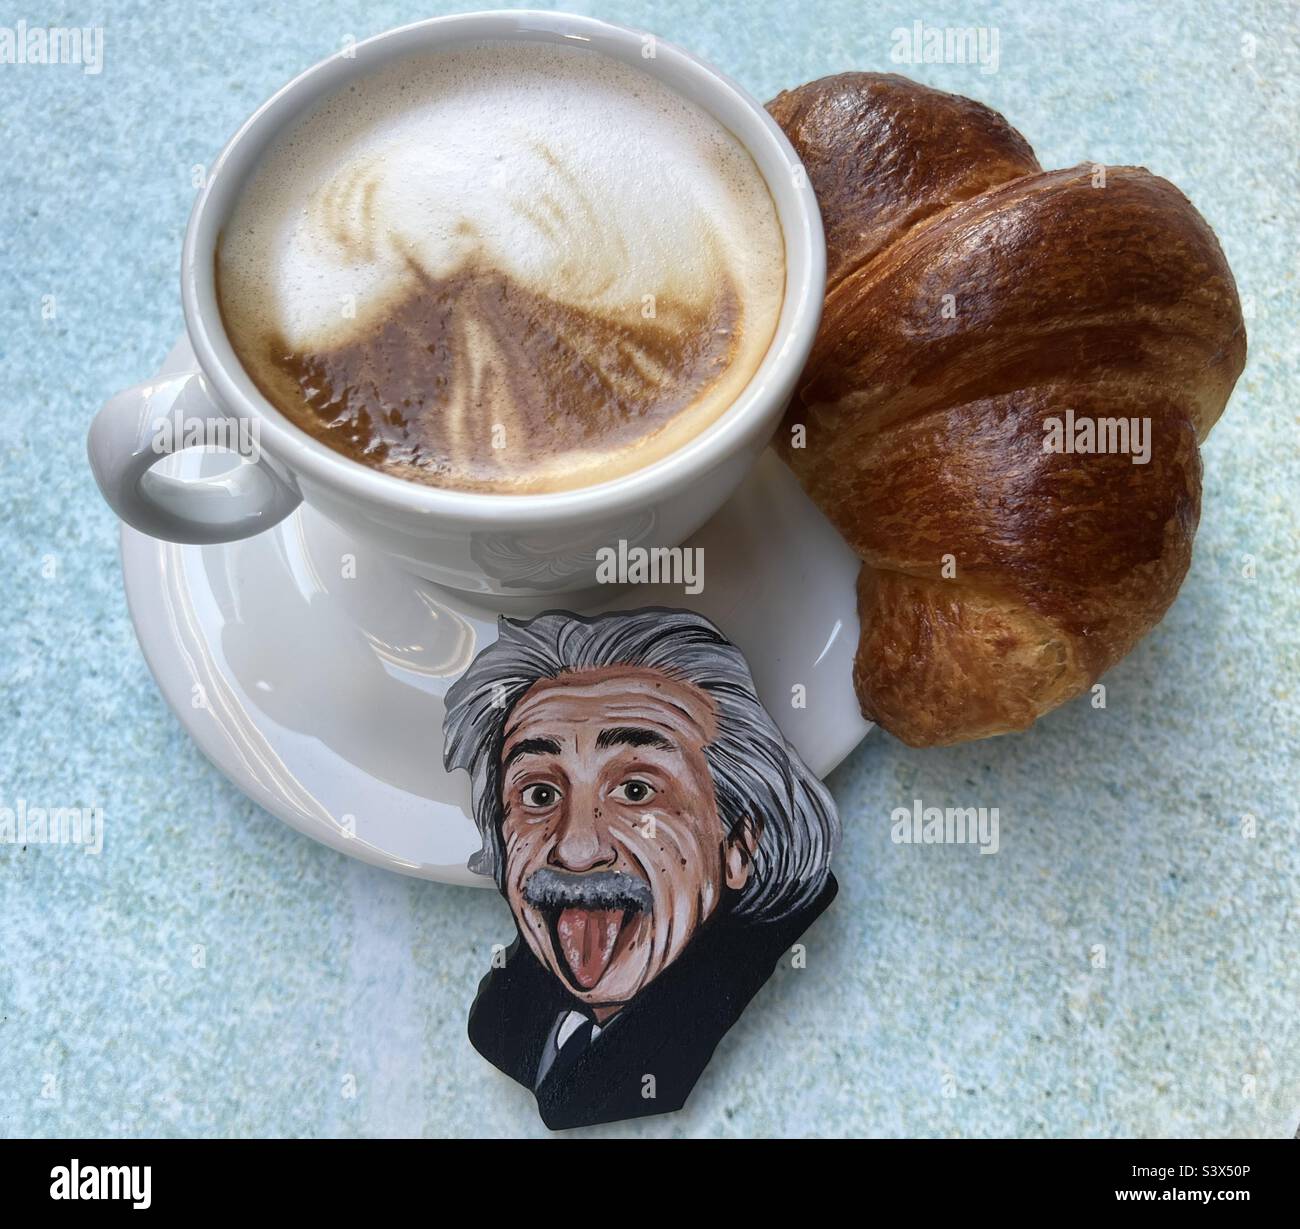 Clever breakfast at the bar with croissant, cappuccino and an artistic Einstein painted face Stock Photo